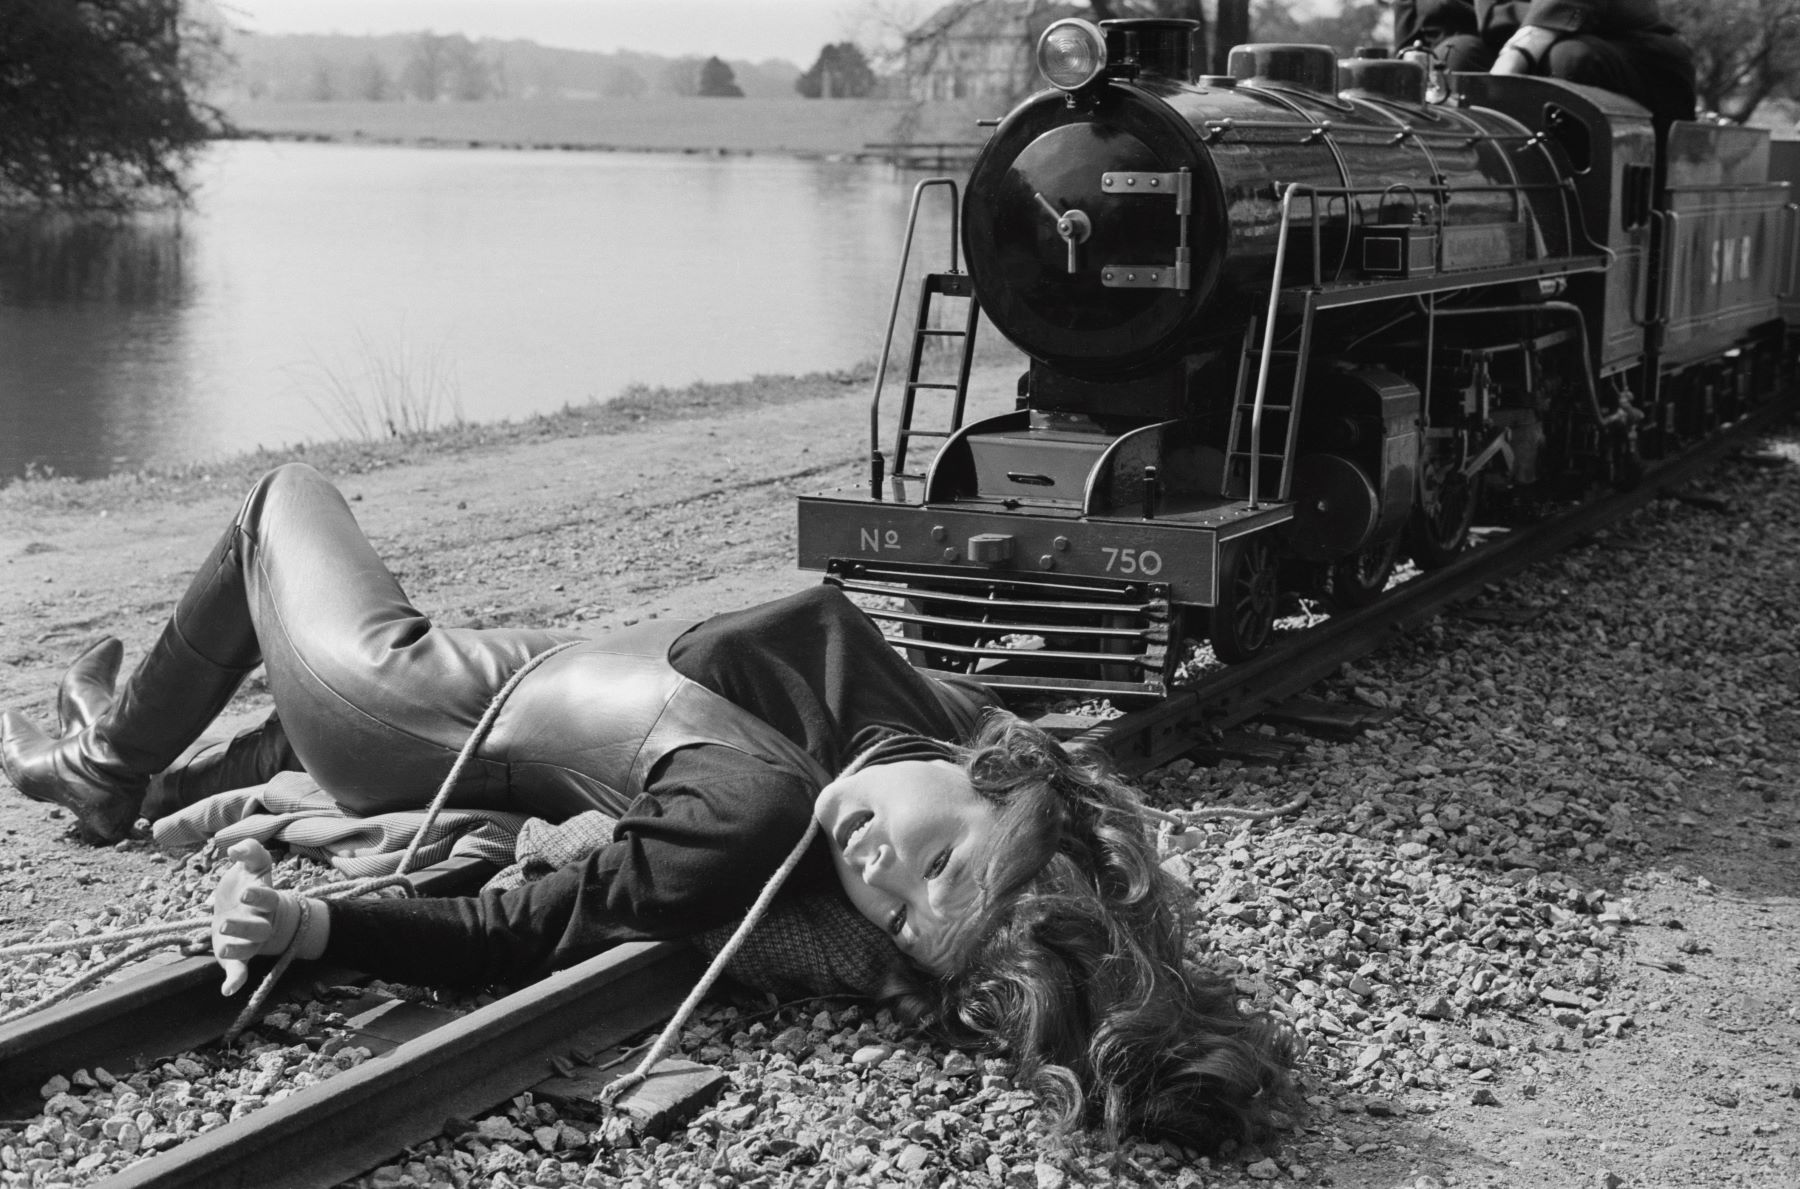 Diana Rigg as Emma Peel in 'The Avengers' filming a train scene